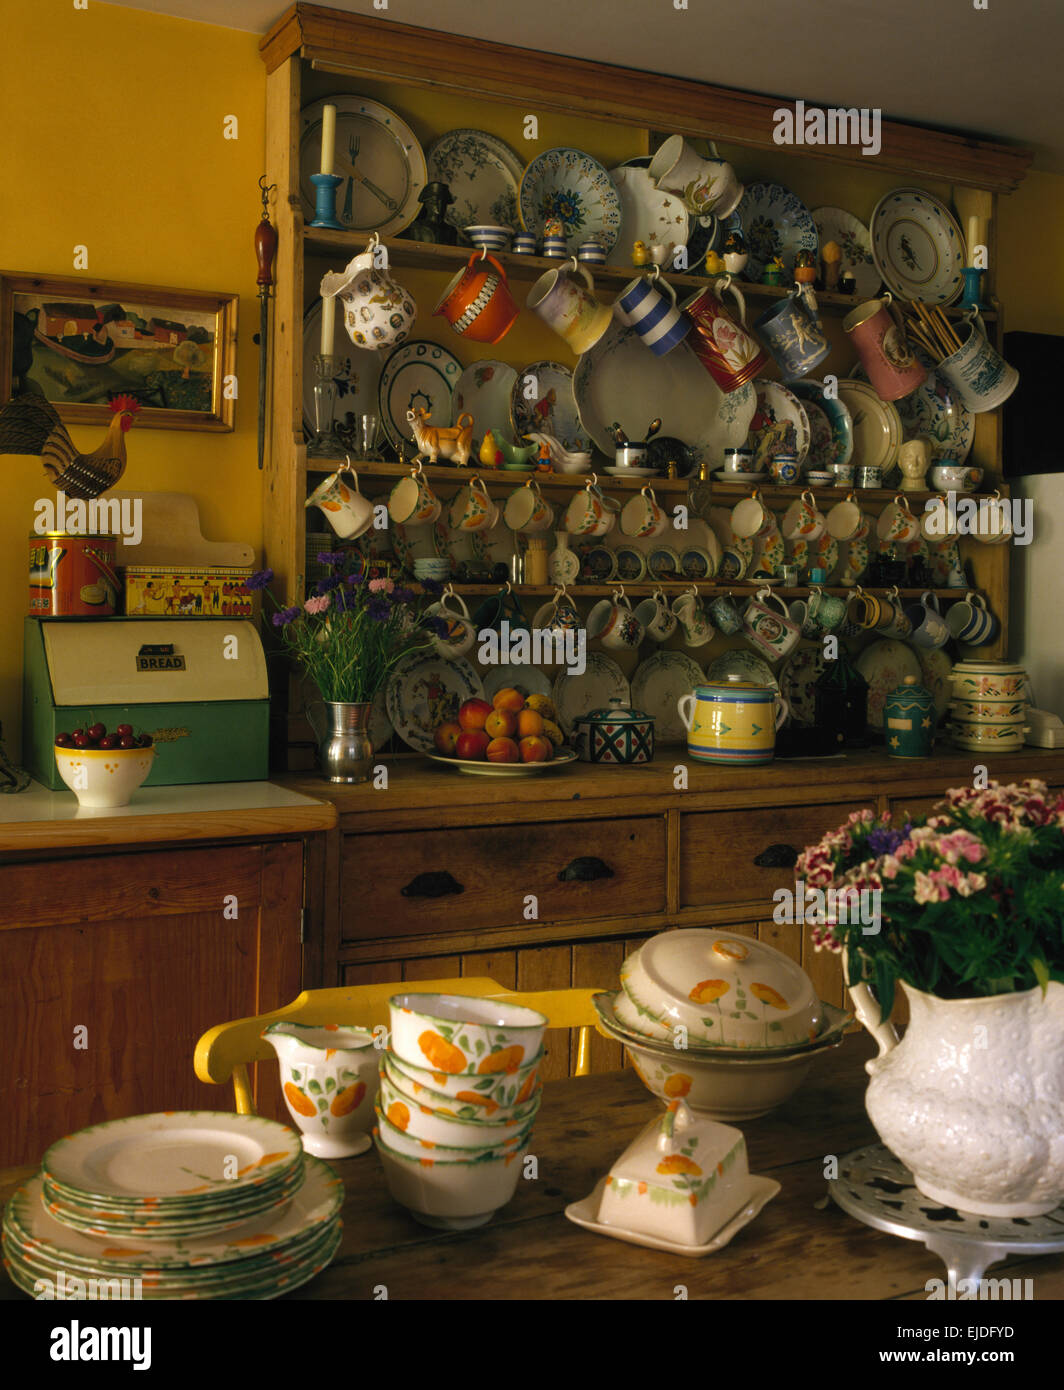 Vintage crockery on table in yellow eighties kitchen with collection of pottery on pine dresser Stock Photo